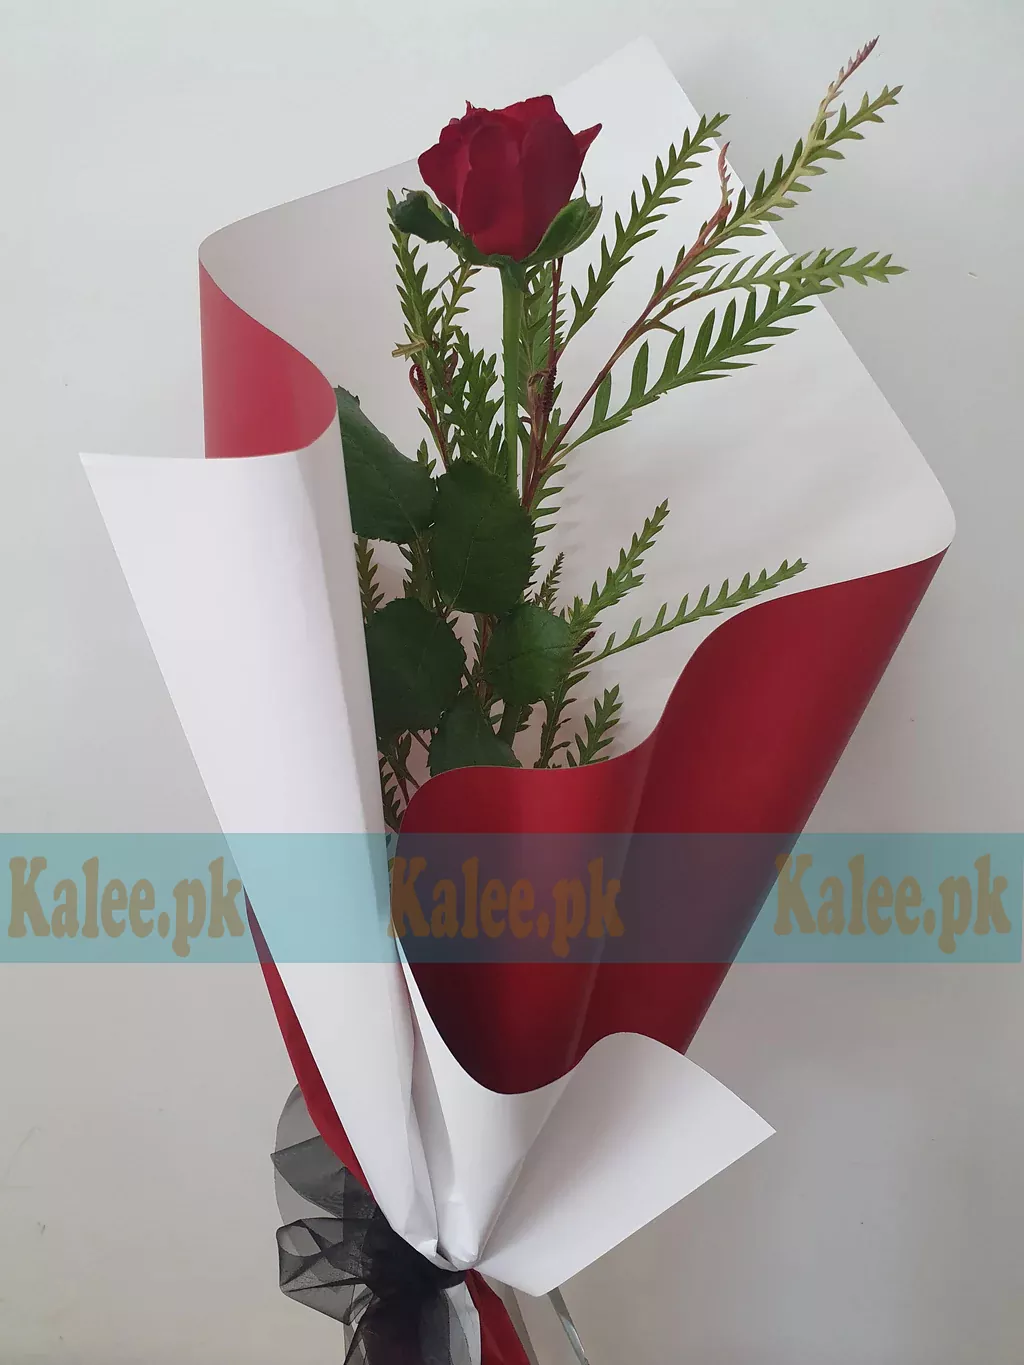 A single red rose elegantly wrapped in classy packaging.